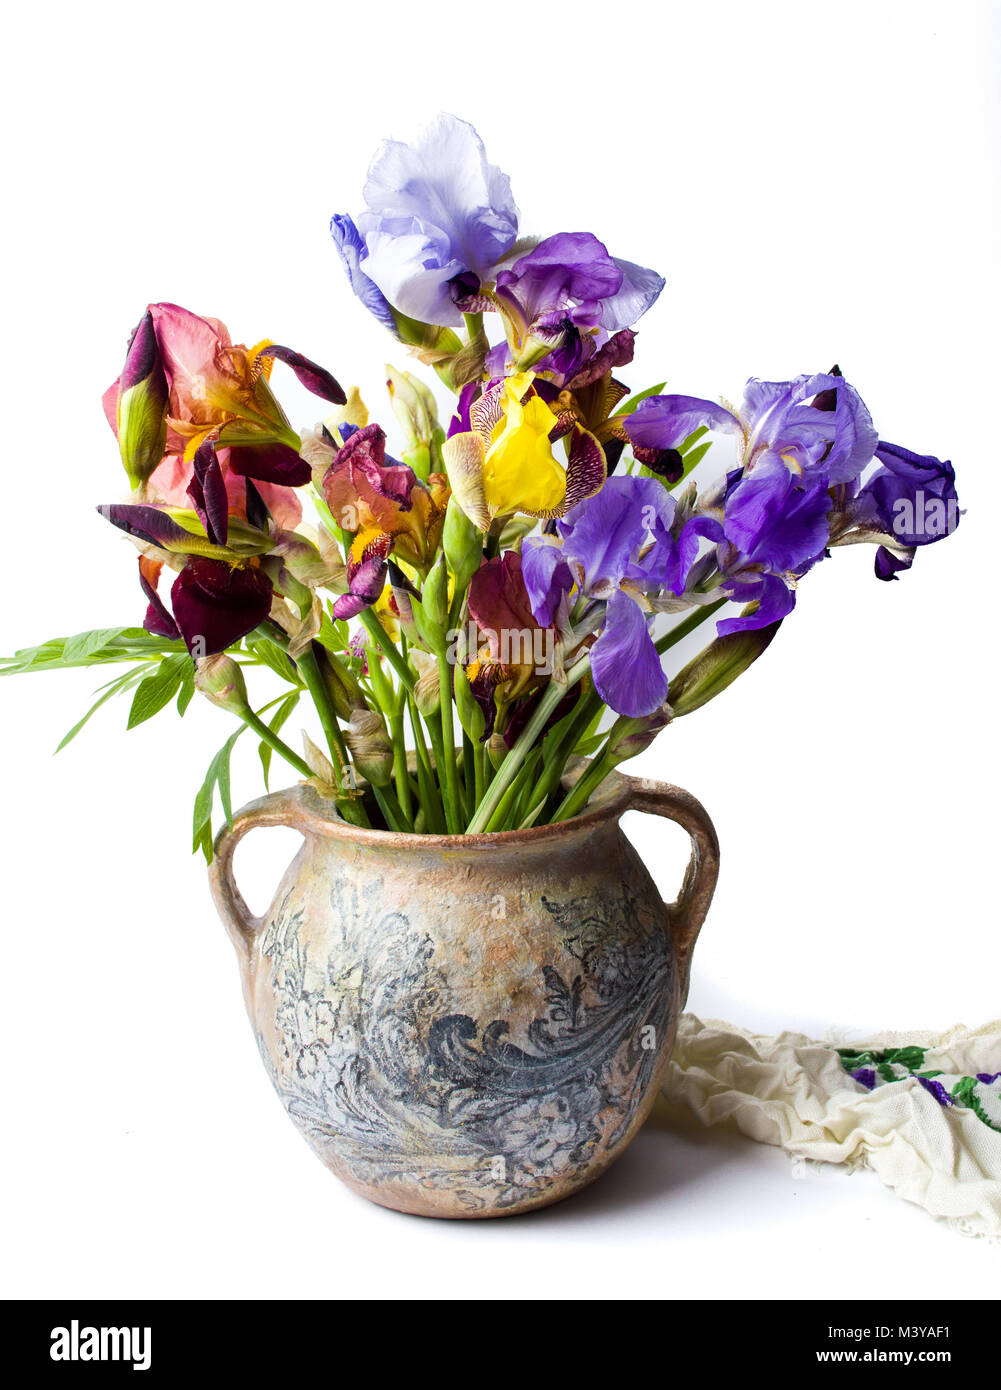 Mixed iris flowers in a vase against white background Stock Photo